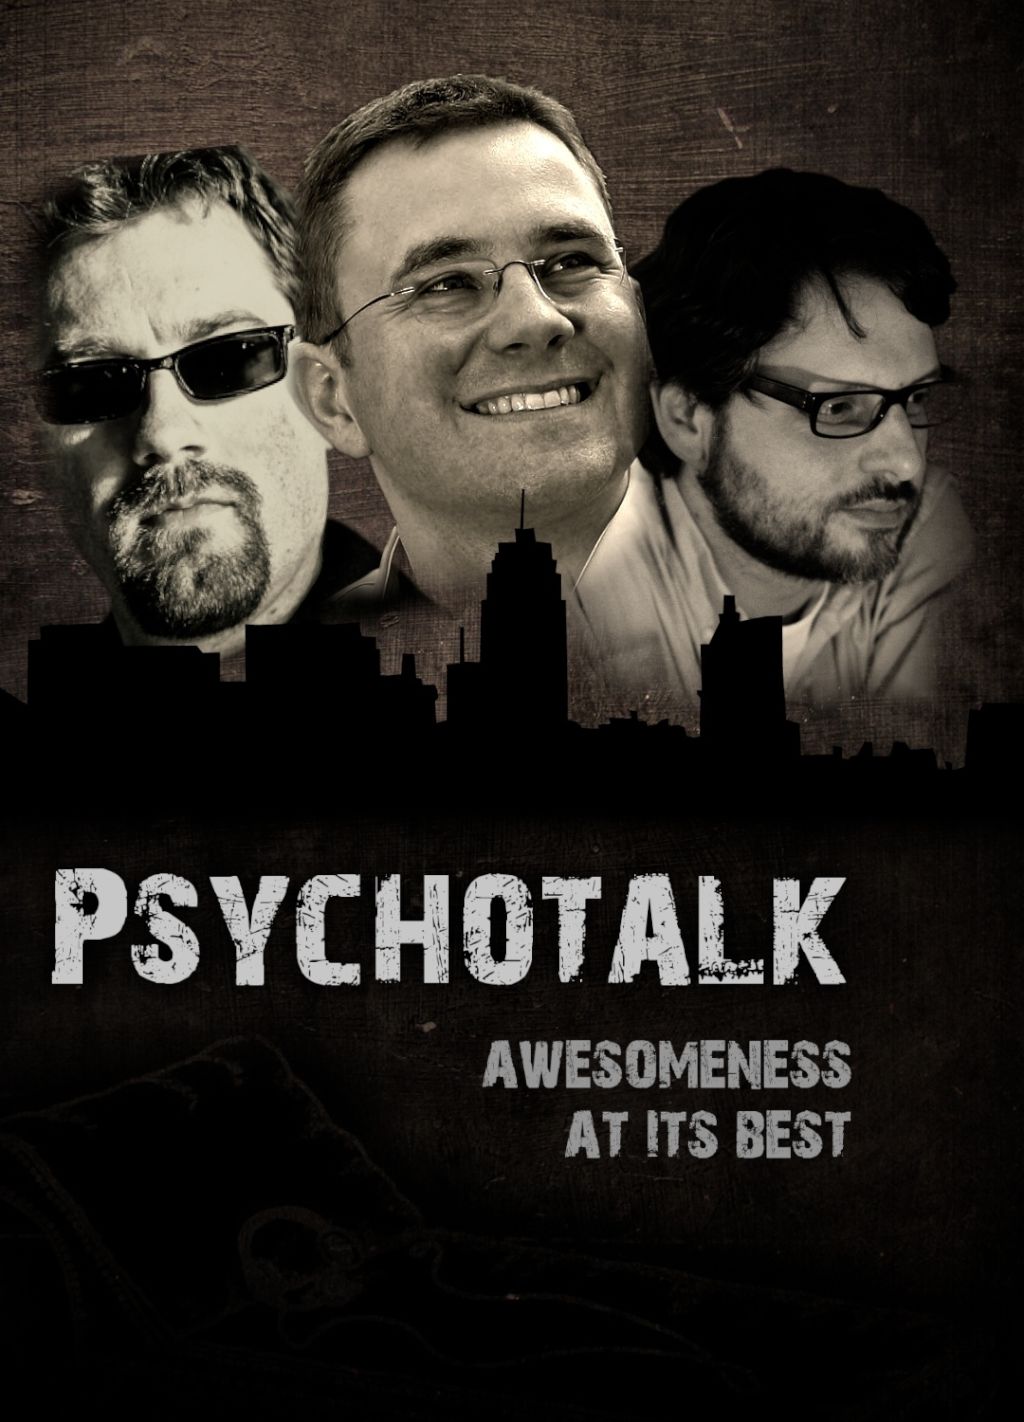 Psychotalk Awesomeness at its best